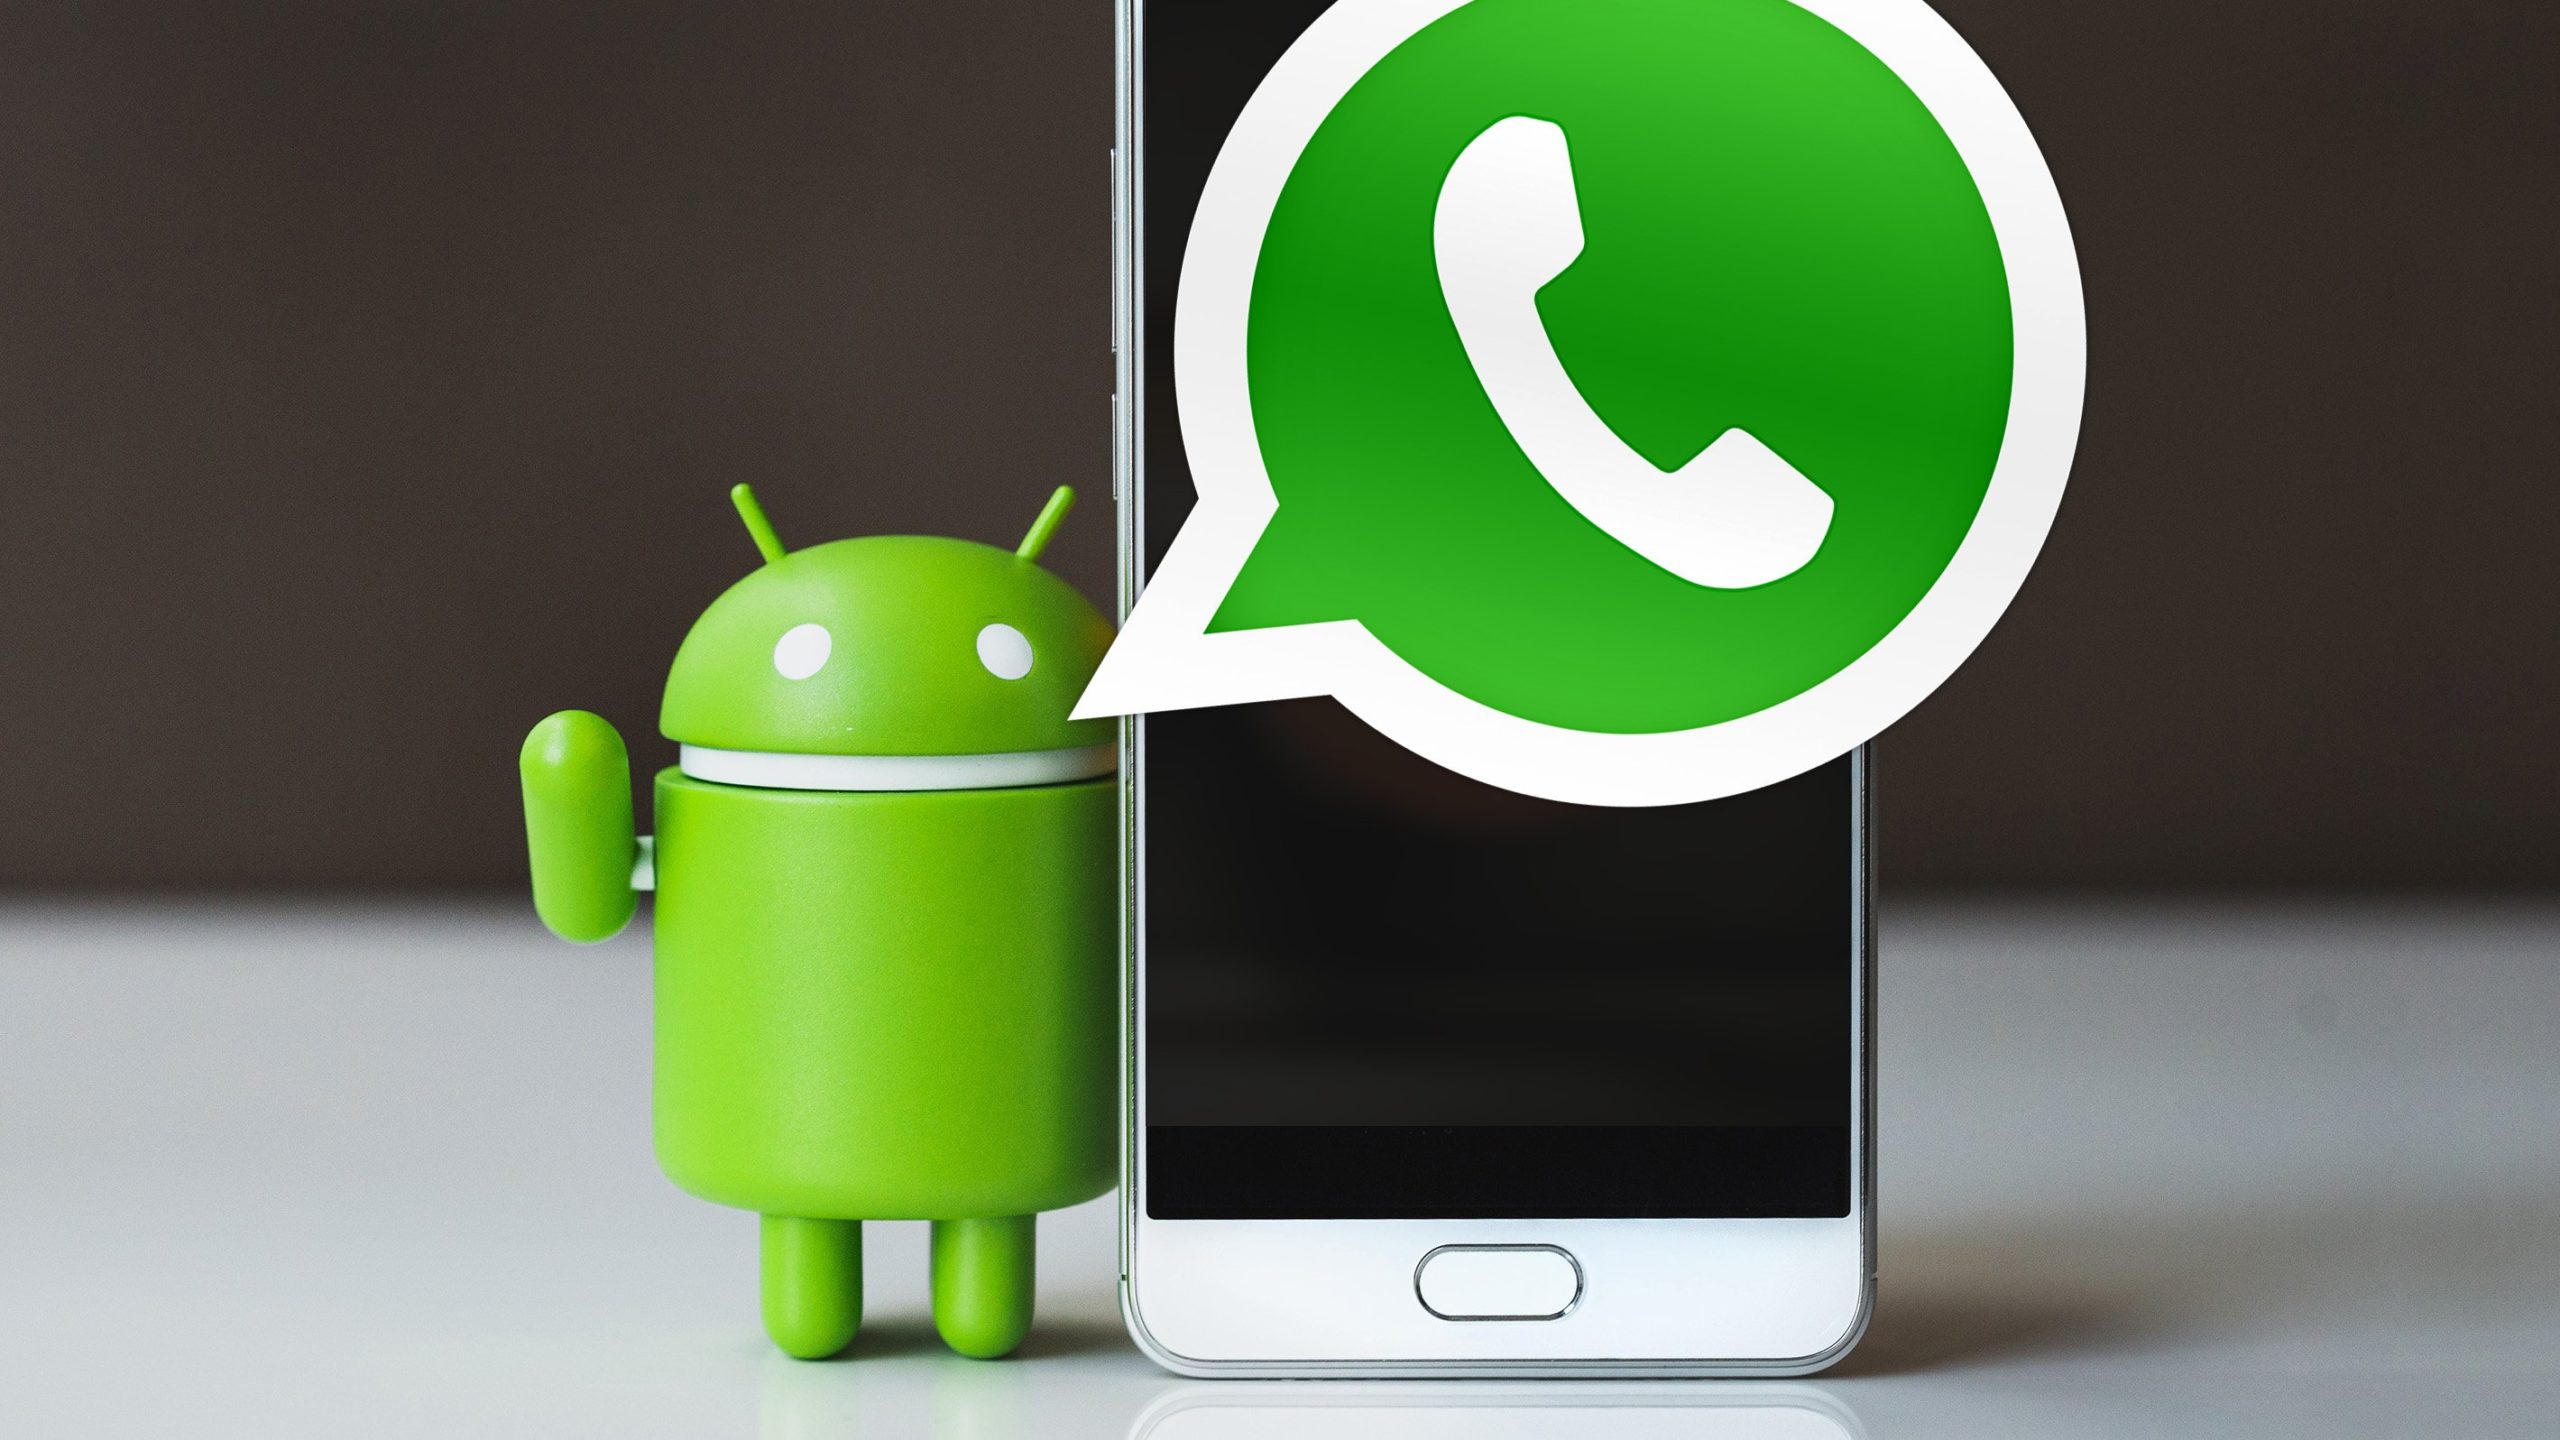 How to Create and Send Gifs on Whatsapp